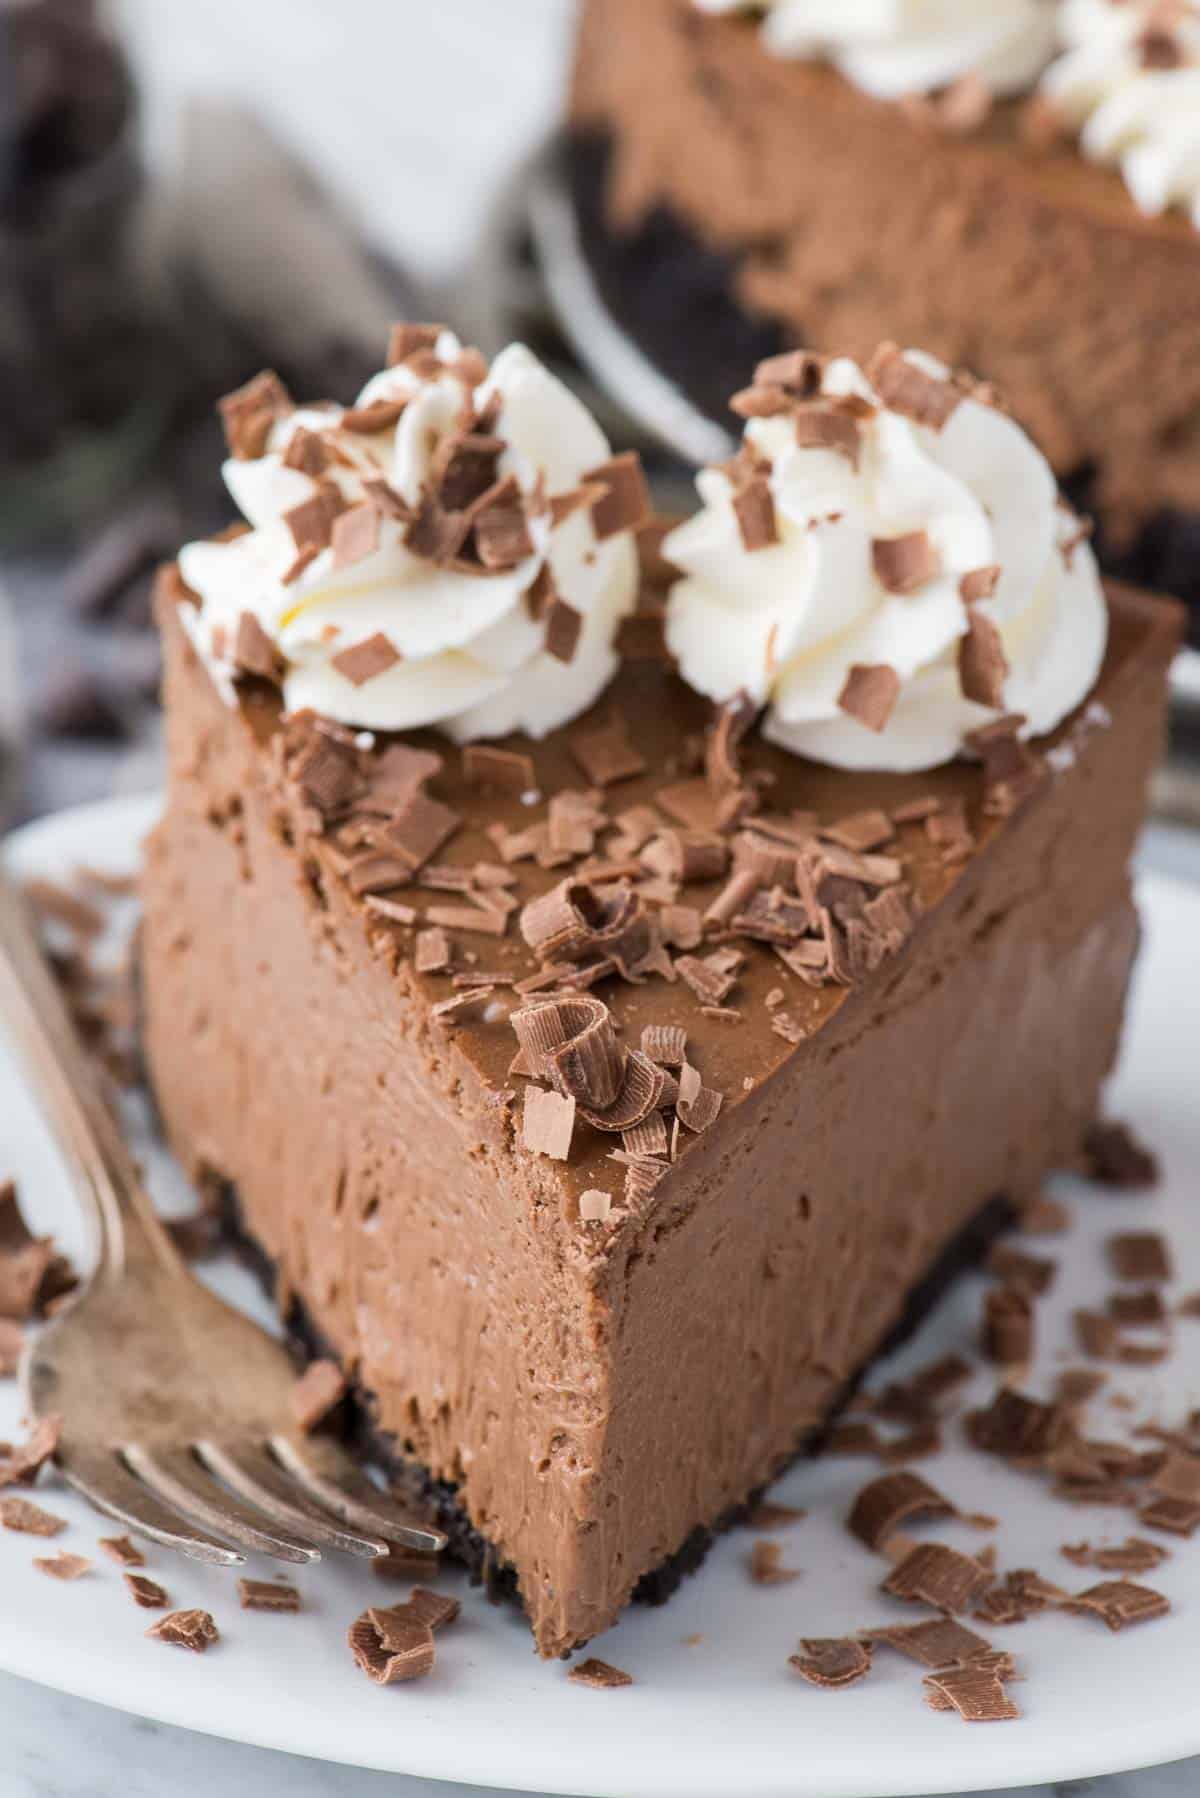 slice of chocolate cheesecake with chocolate shavings on white plate